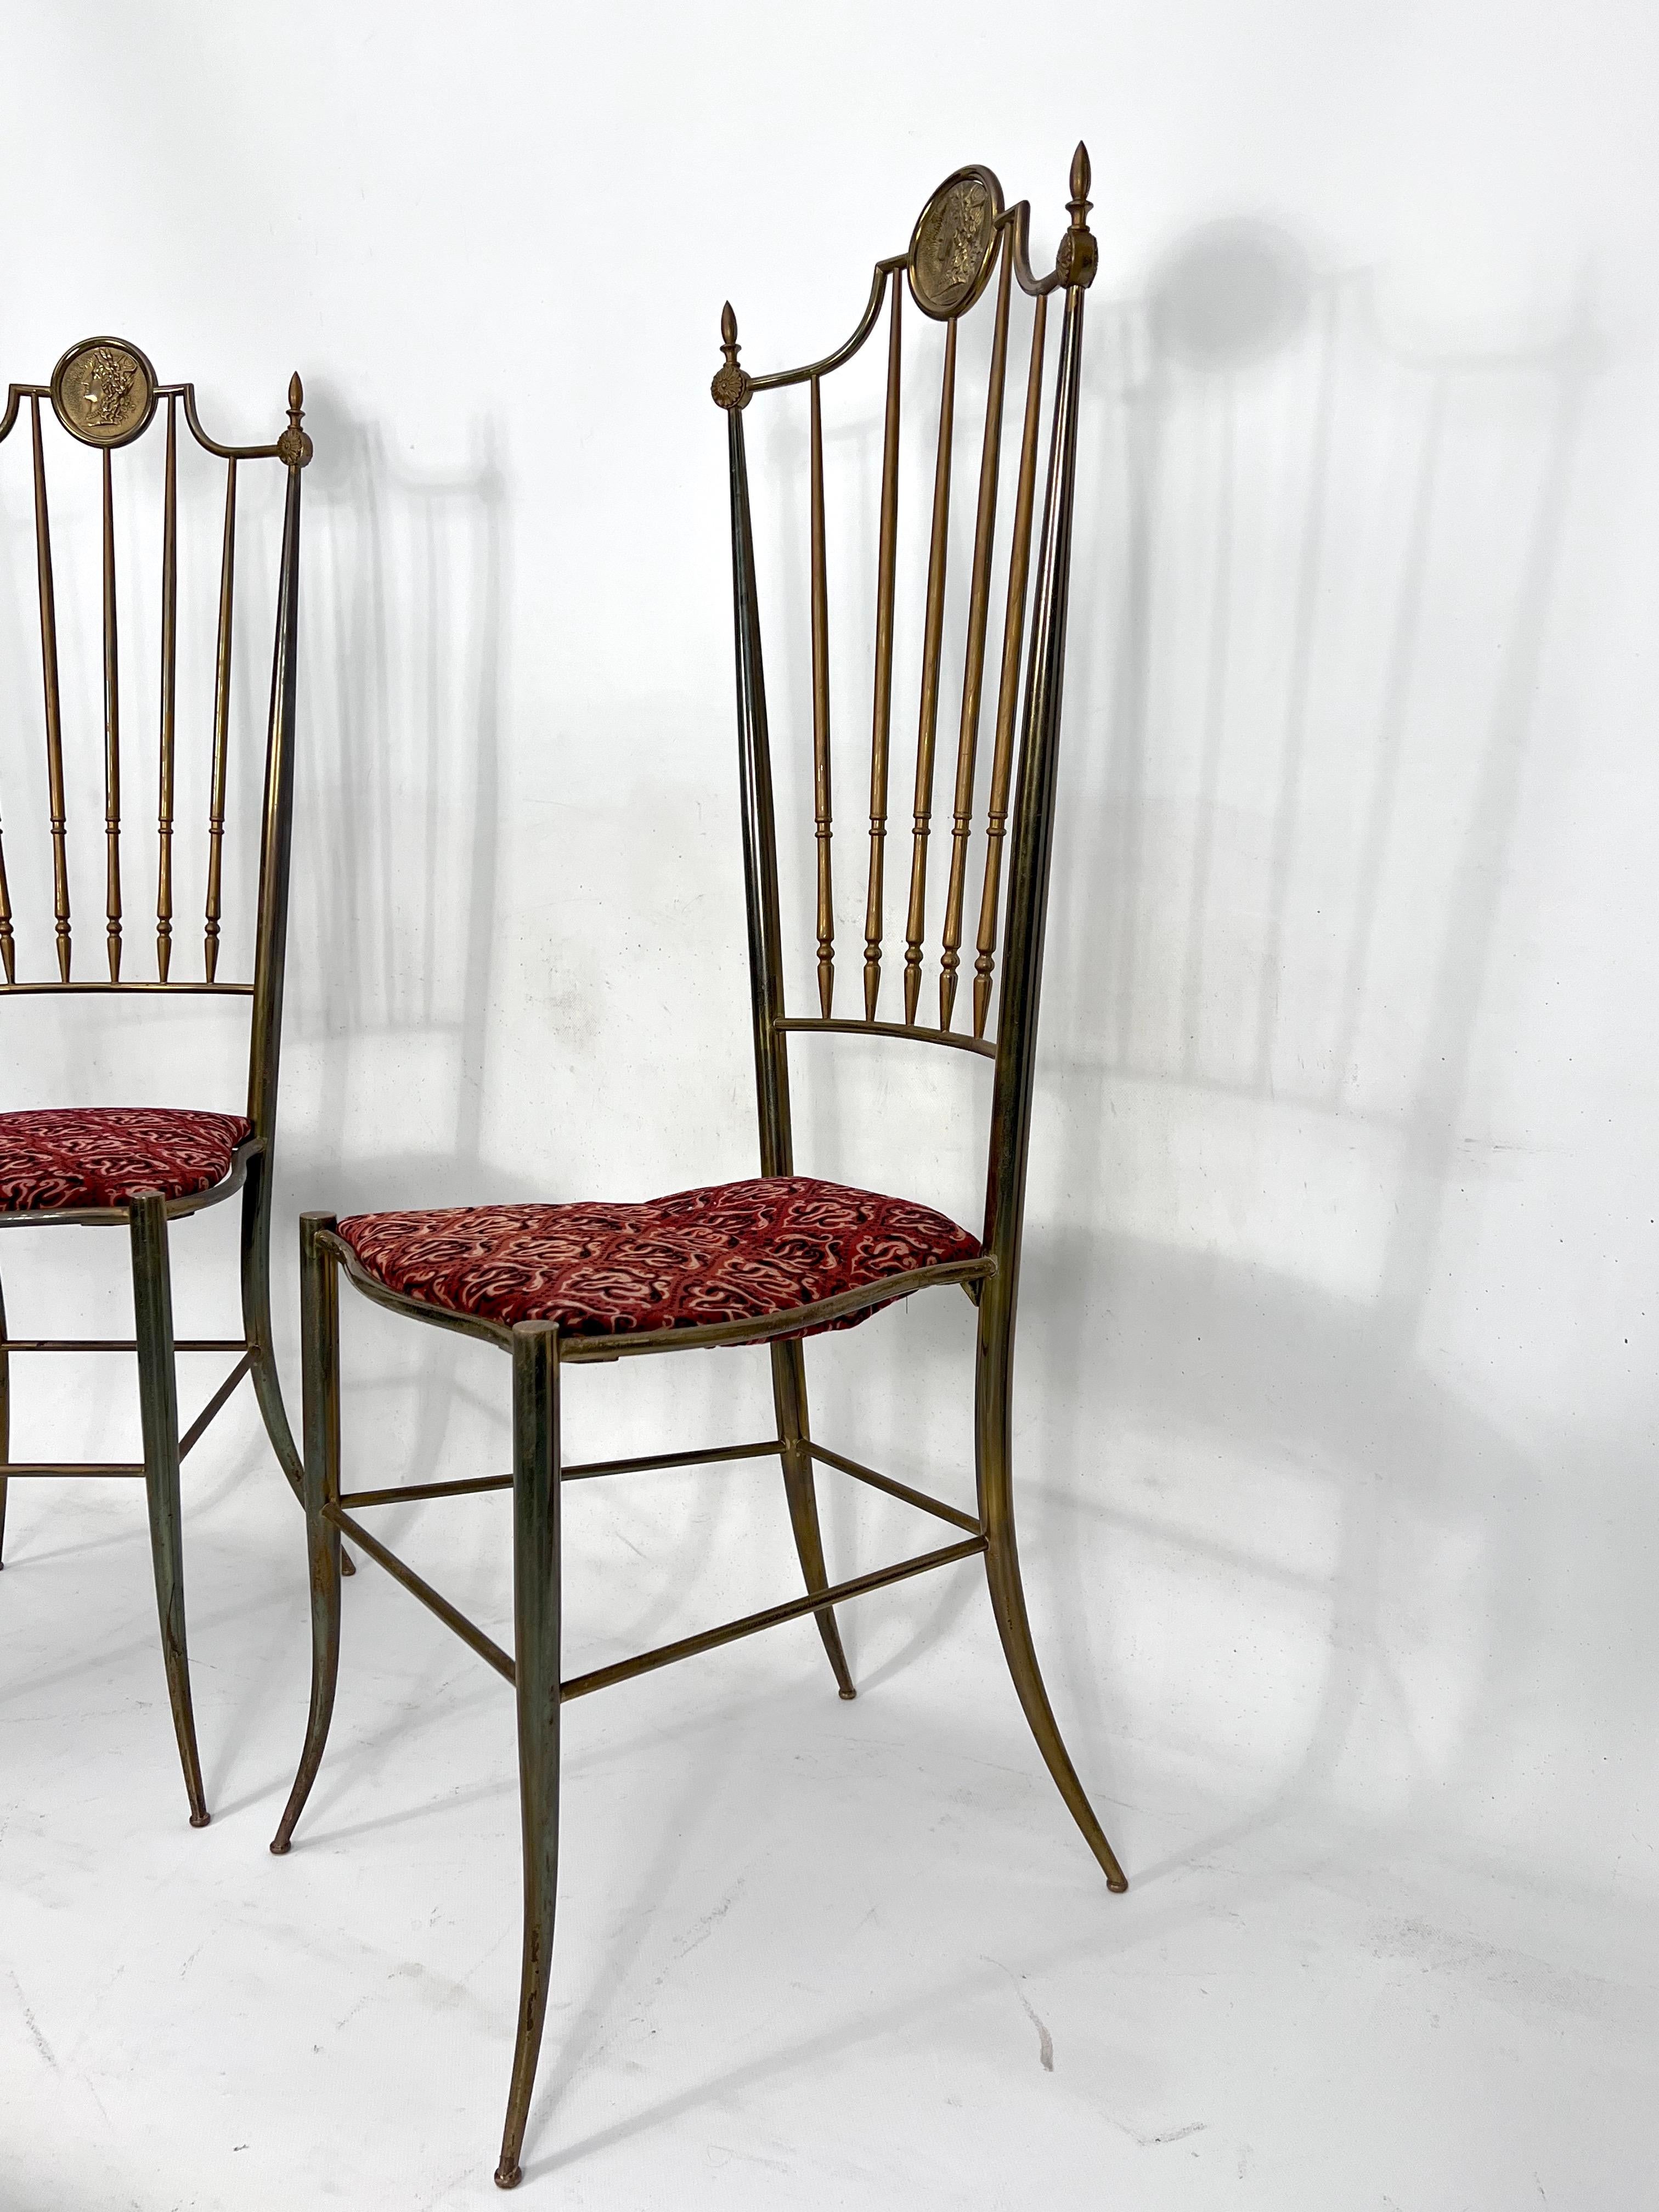 Italian Vintage Pair of Brass Tall Chairs from Chiavari, Italy, 1950s For Sale